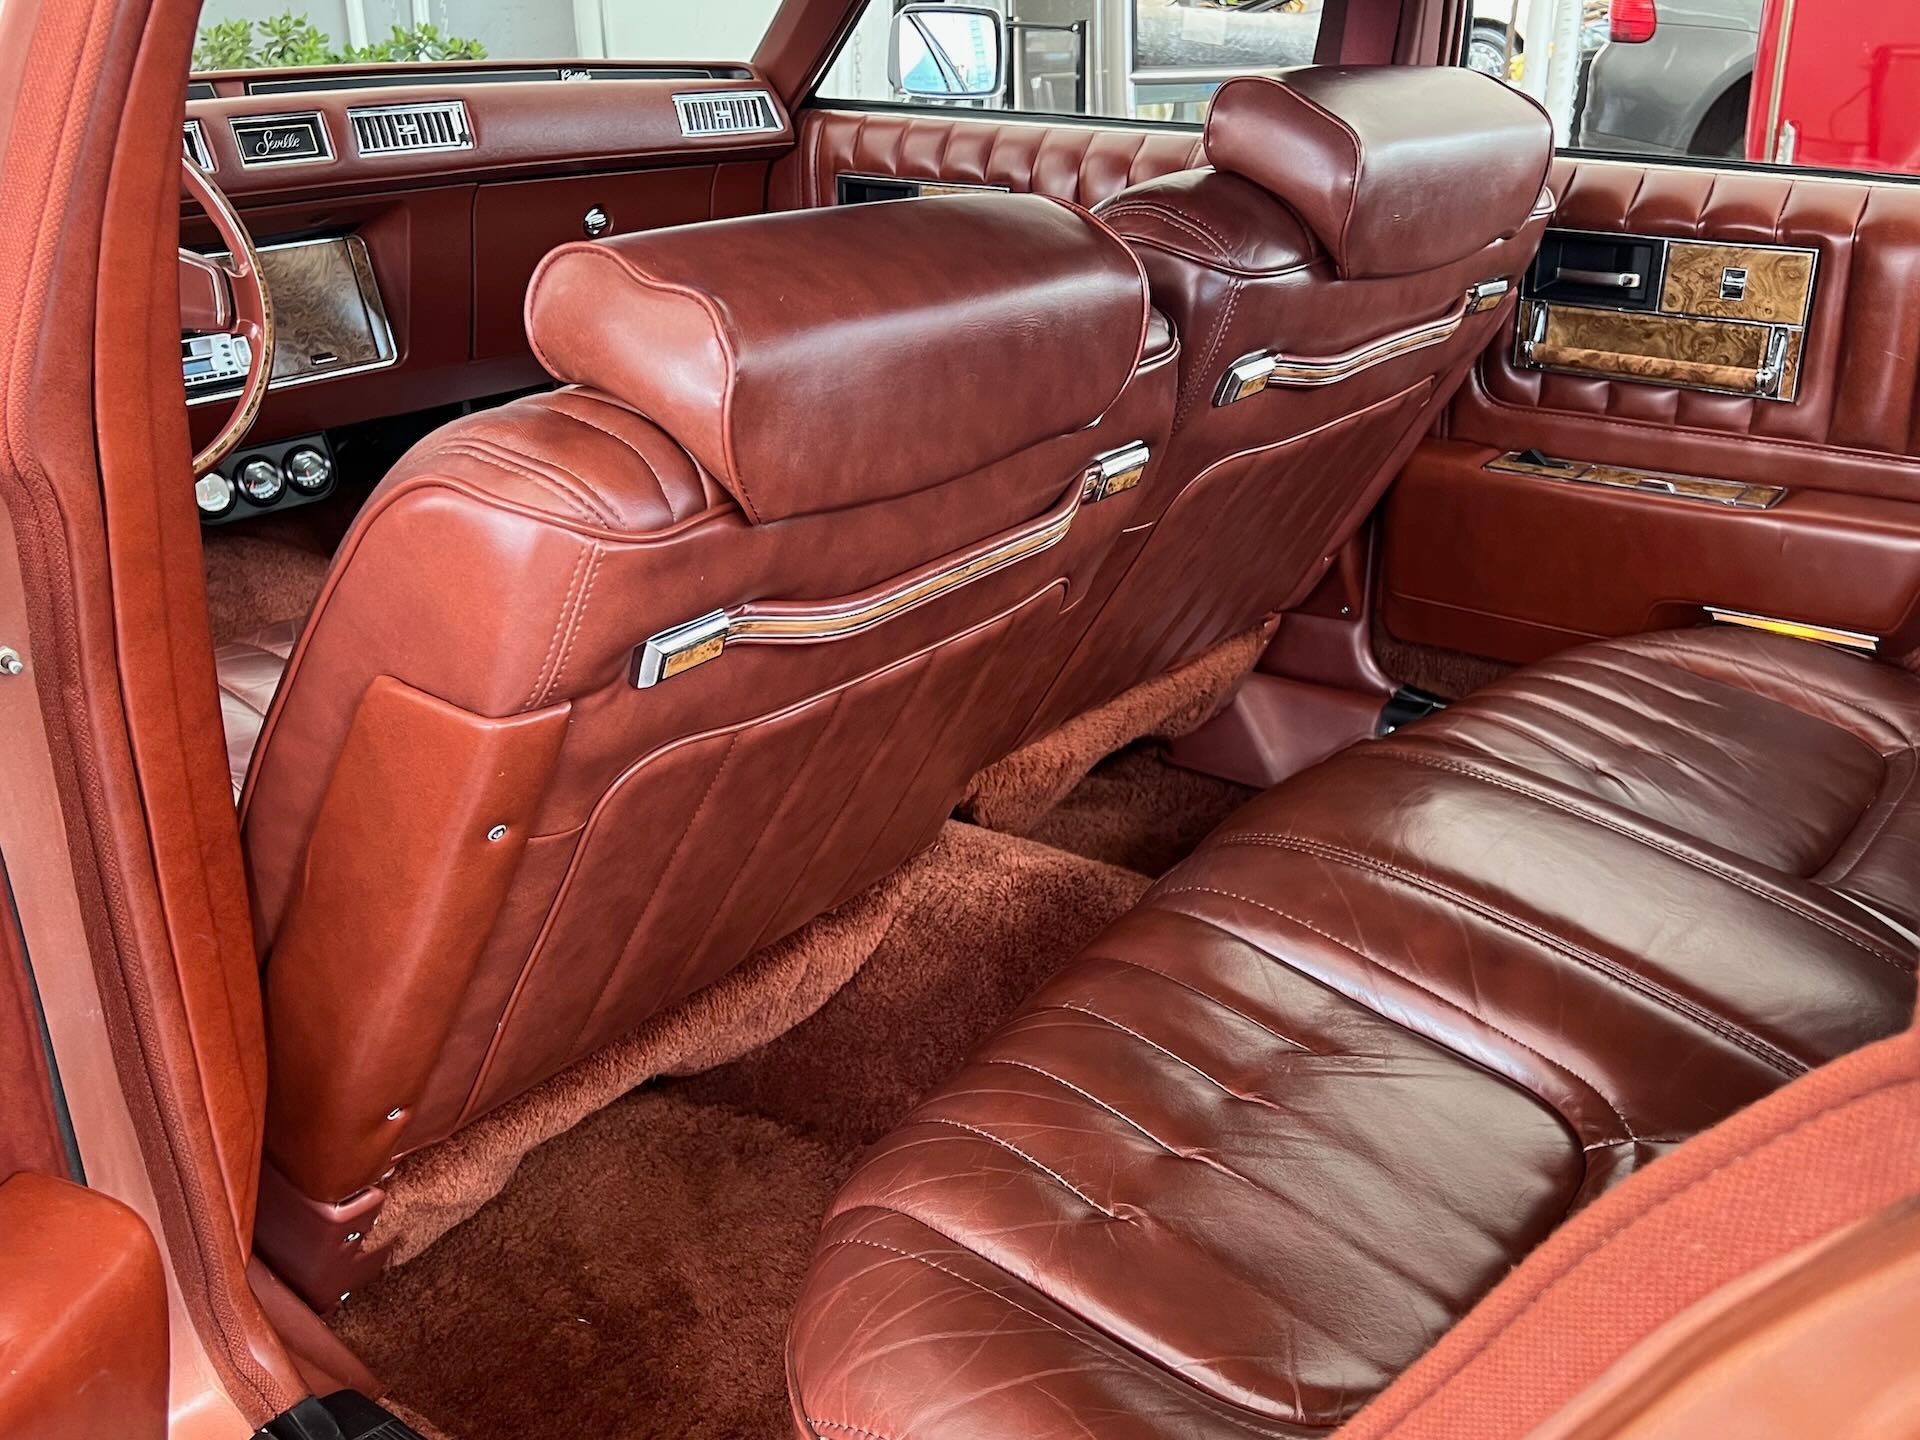 Used 1979 CADILLAC SEVILLE Seville